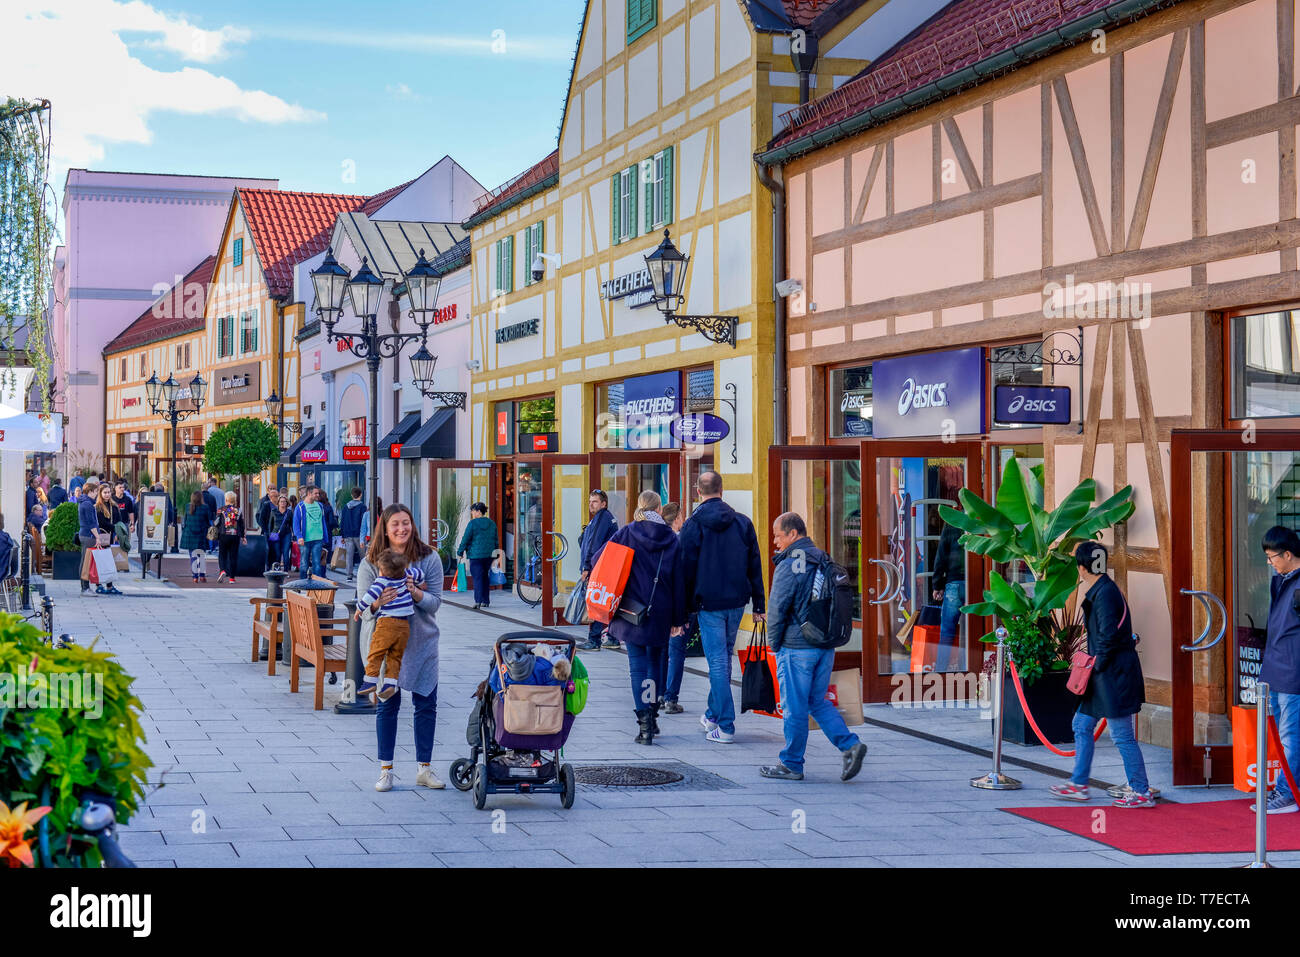 Shopping Outlet Germany High Resolution Stock Photography and Images - Alamy